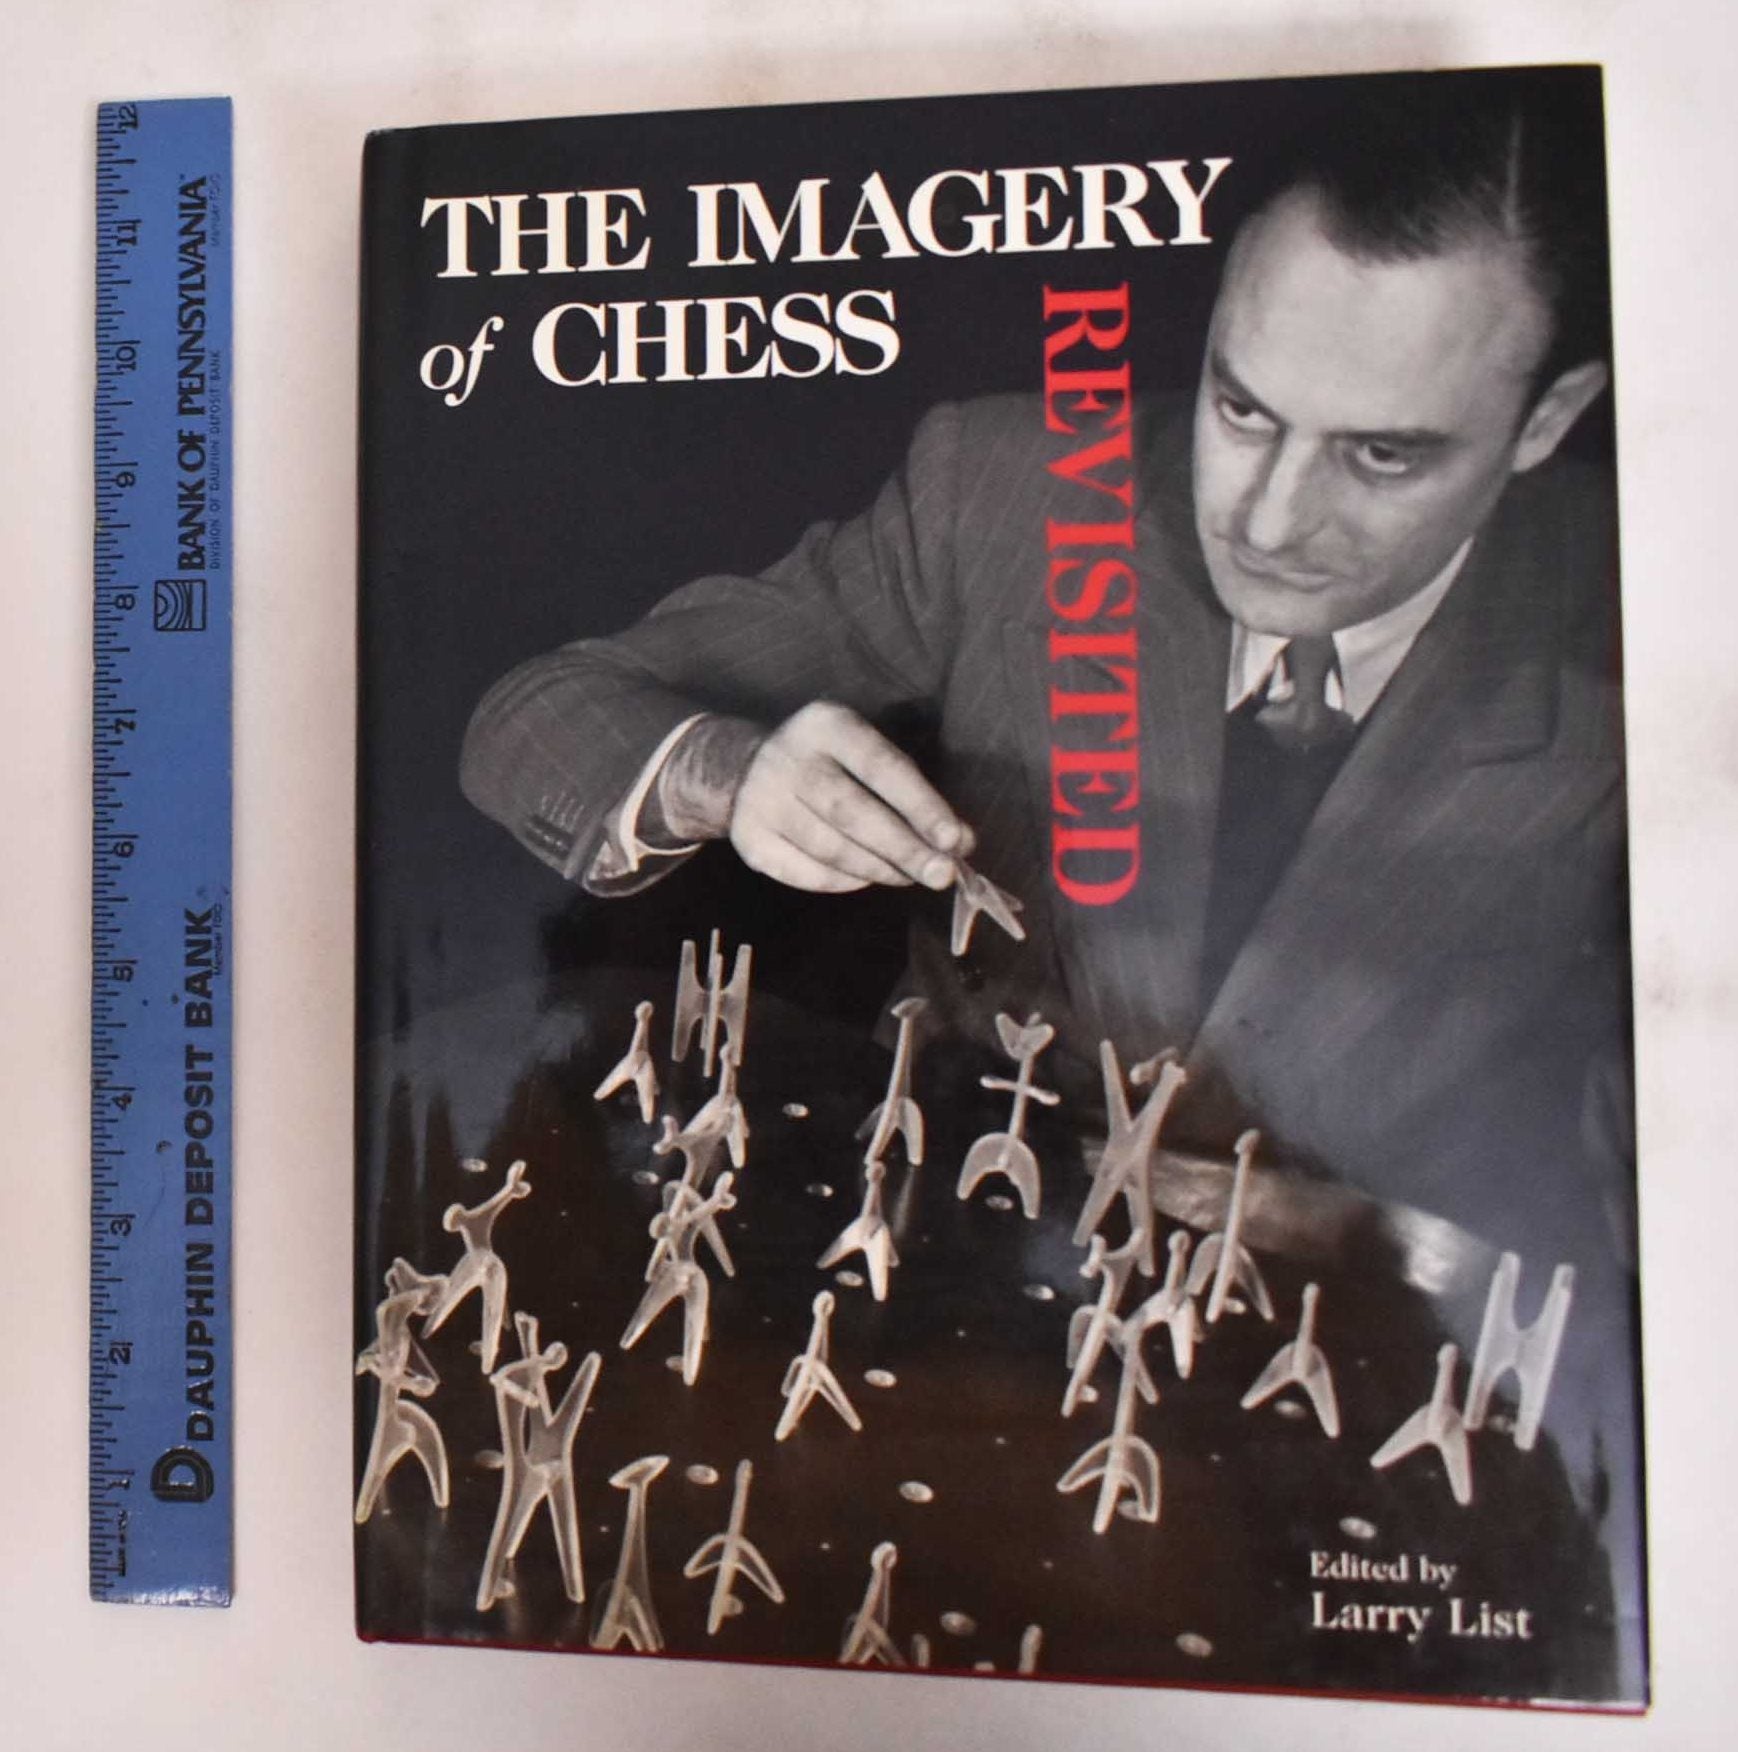 The Imagery of Chess Revisited